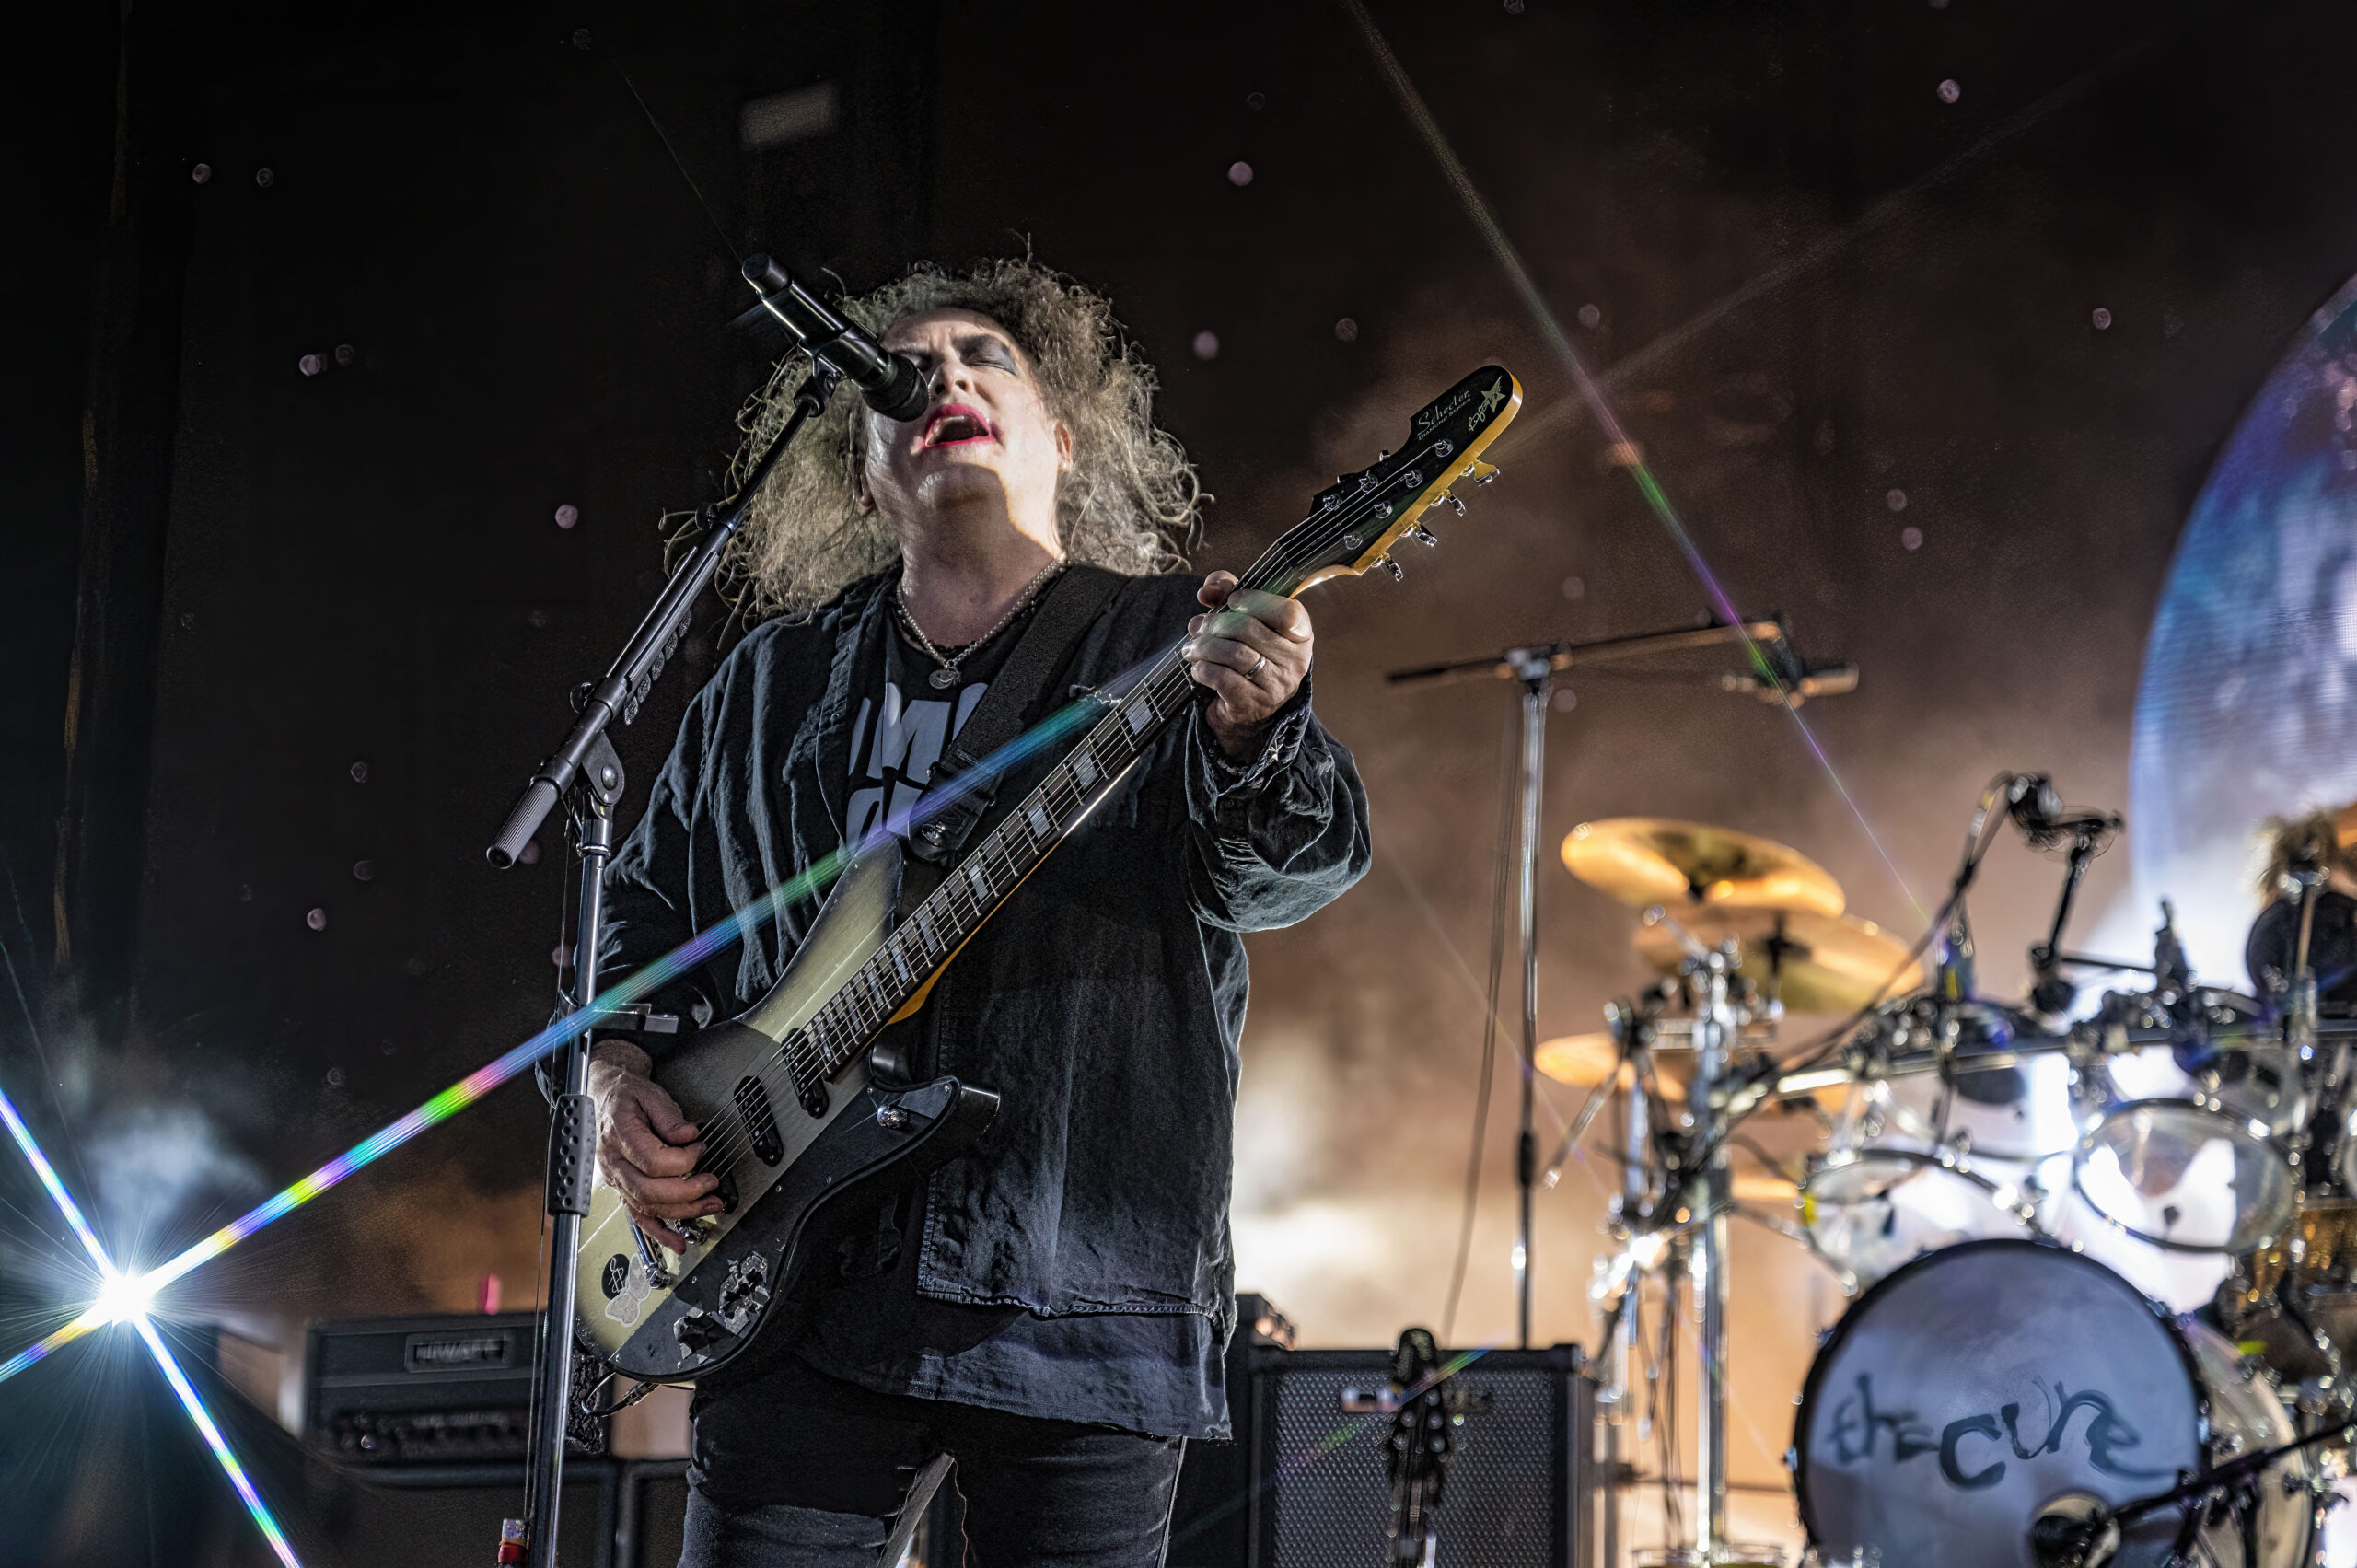 The Cure Return In a Big Way to Merriweather Post Pavilion These